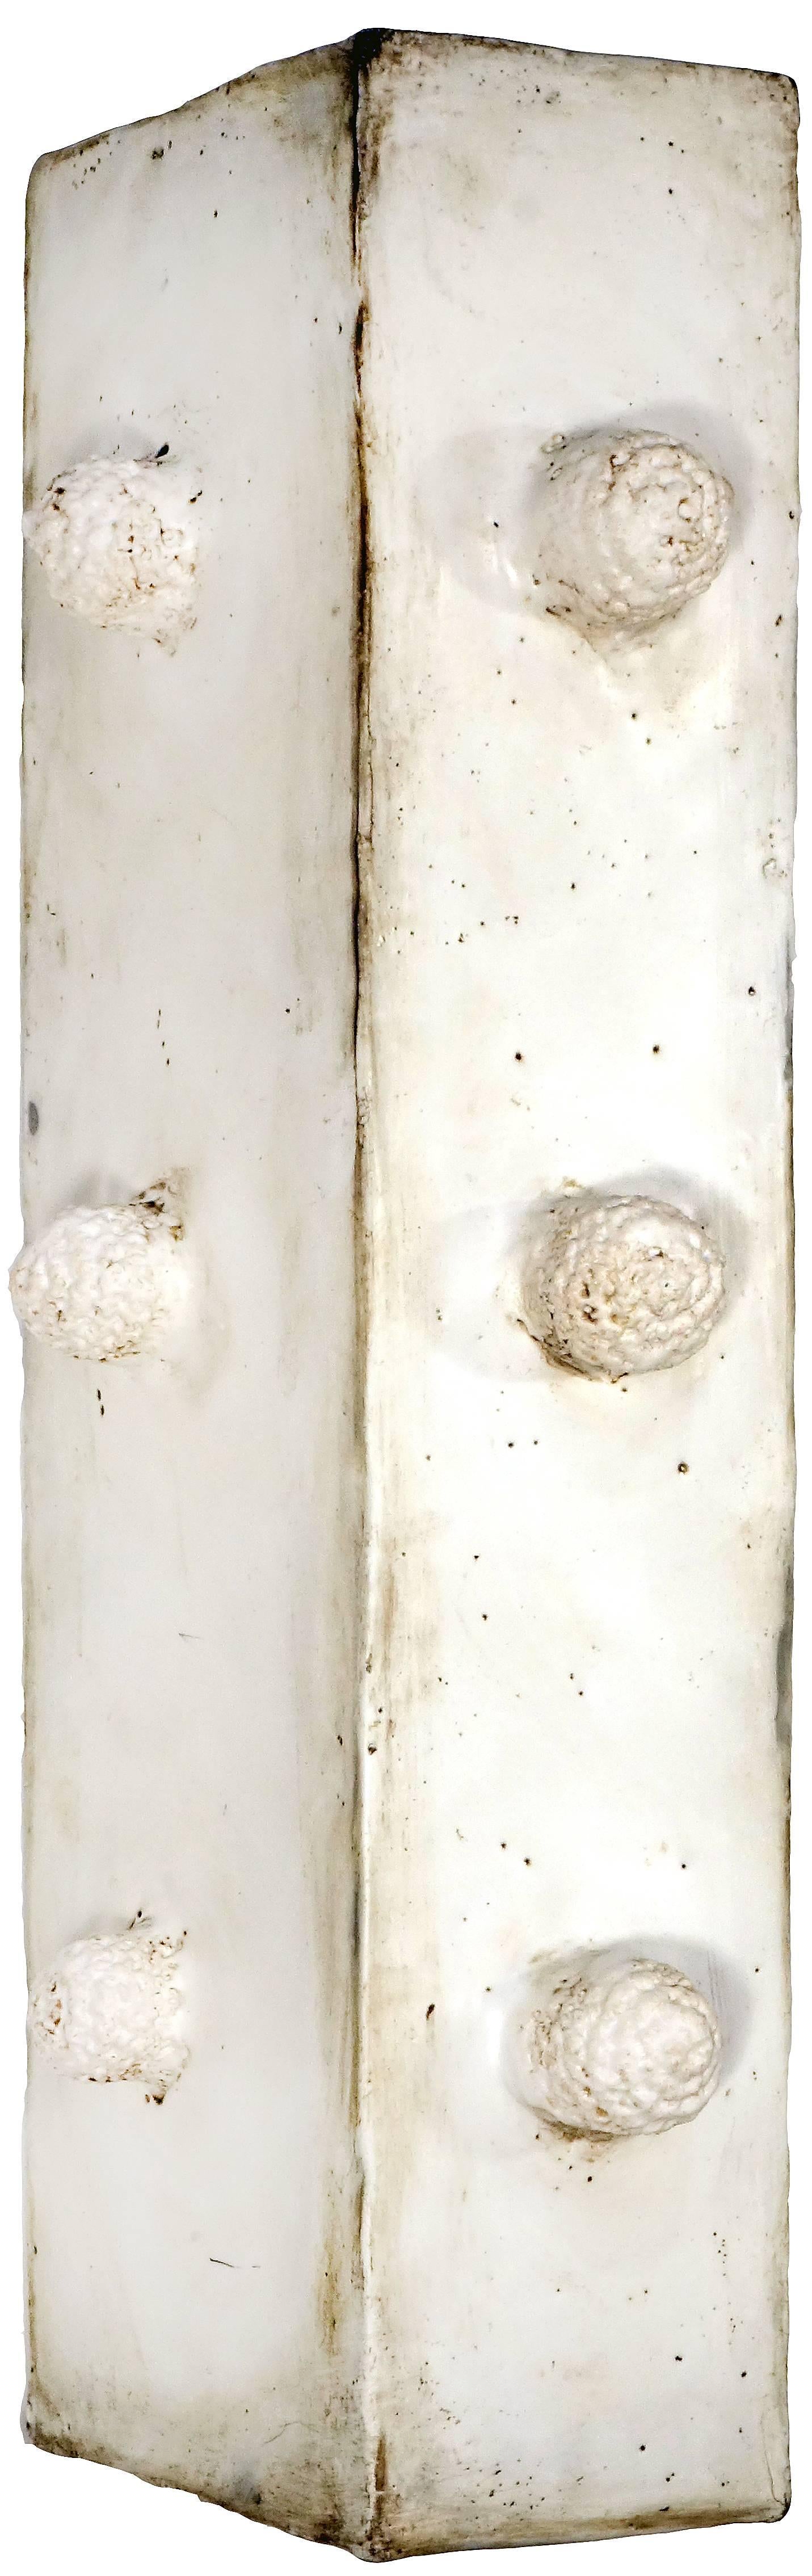 Vertical wood panel layered with white encaustic. The panel is detailed with three fiber balls on each side which are also layered in white encaustic. Measures 13 x 4 x 5 inches

This unique, abstract mixed media three dimensional wall sculpture